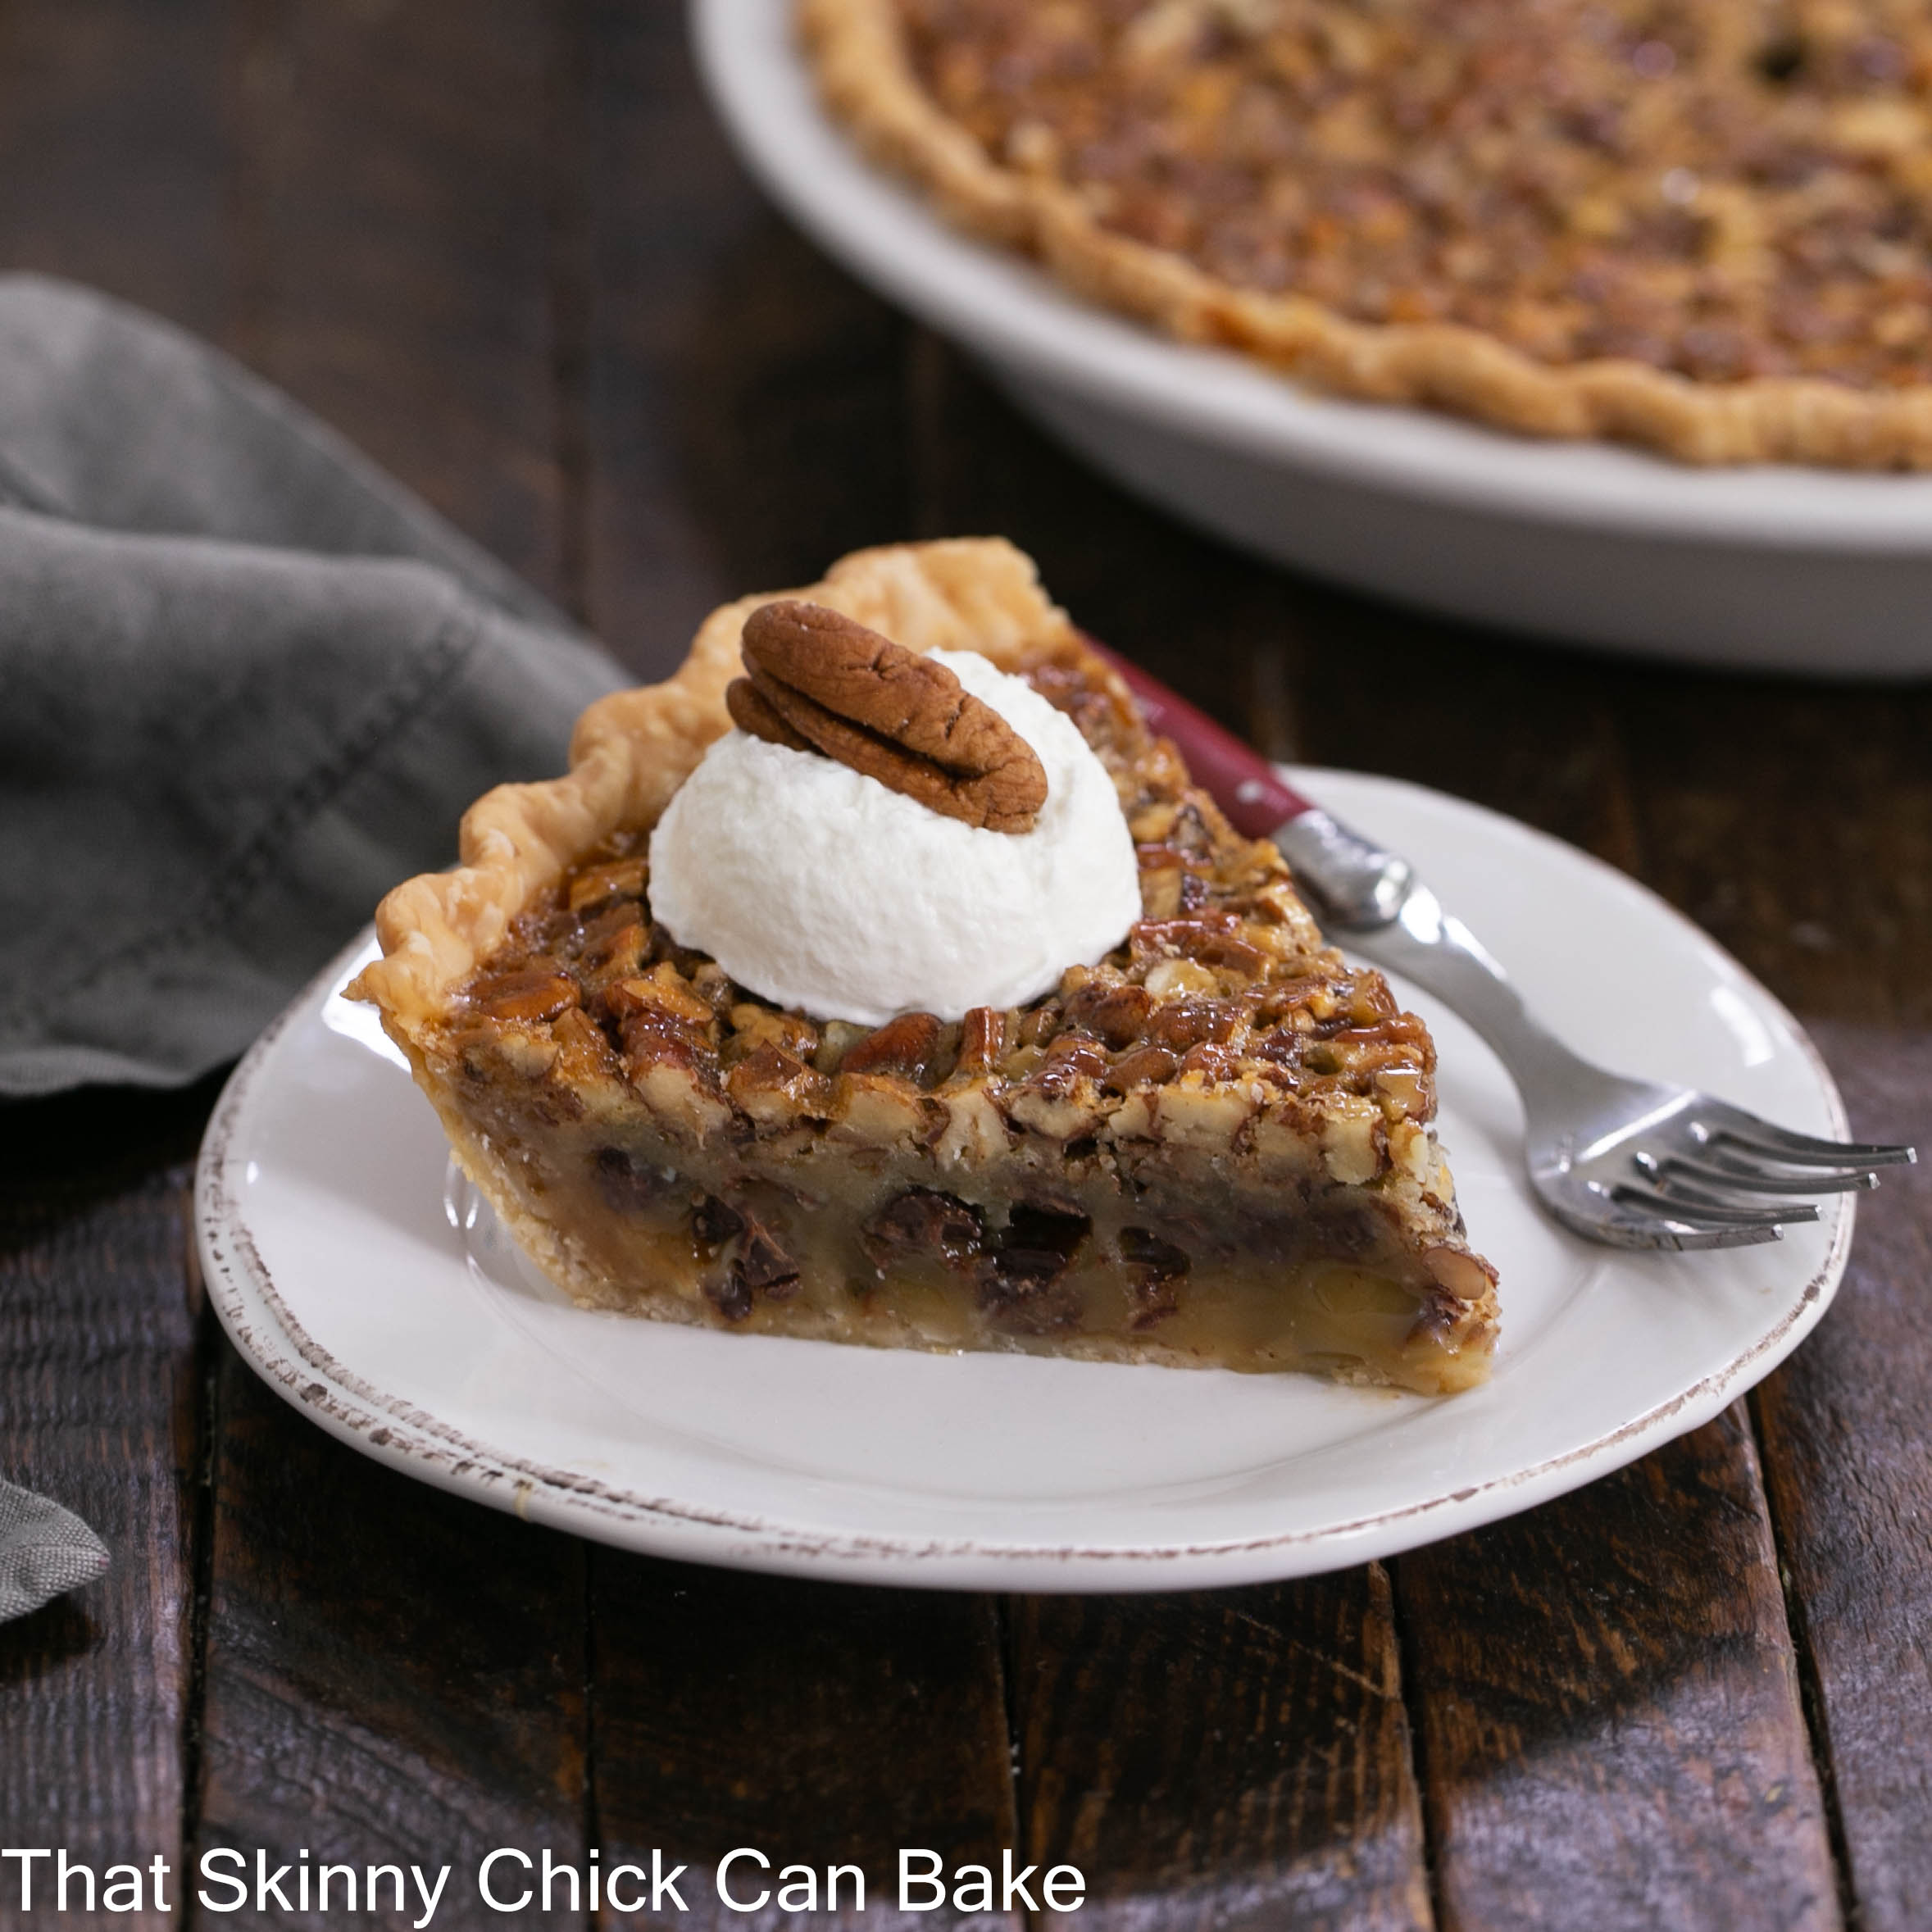 Chocolate Pecan Pie - A Derby Dessert! - That Skinny Chick Can Bake